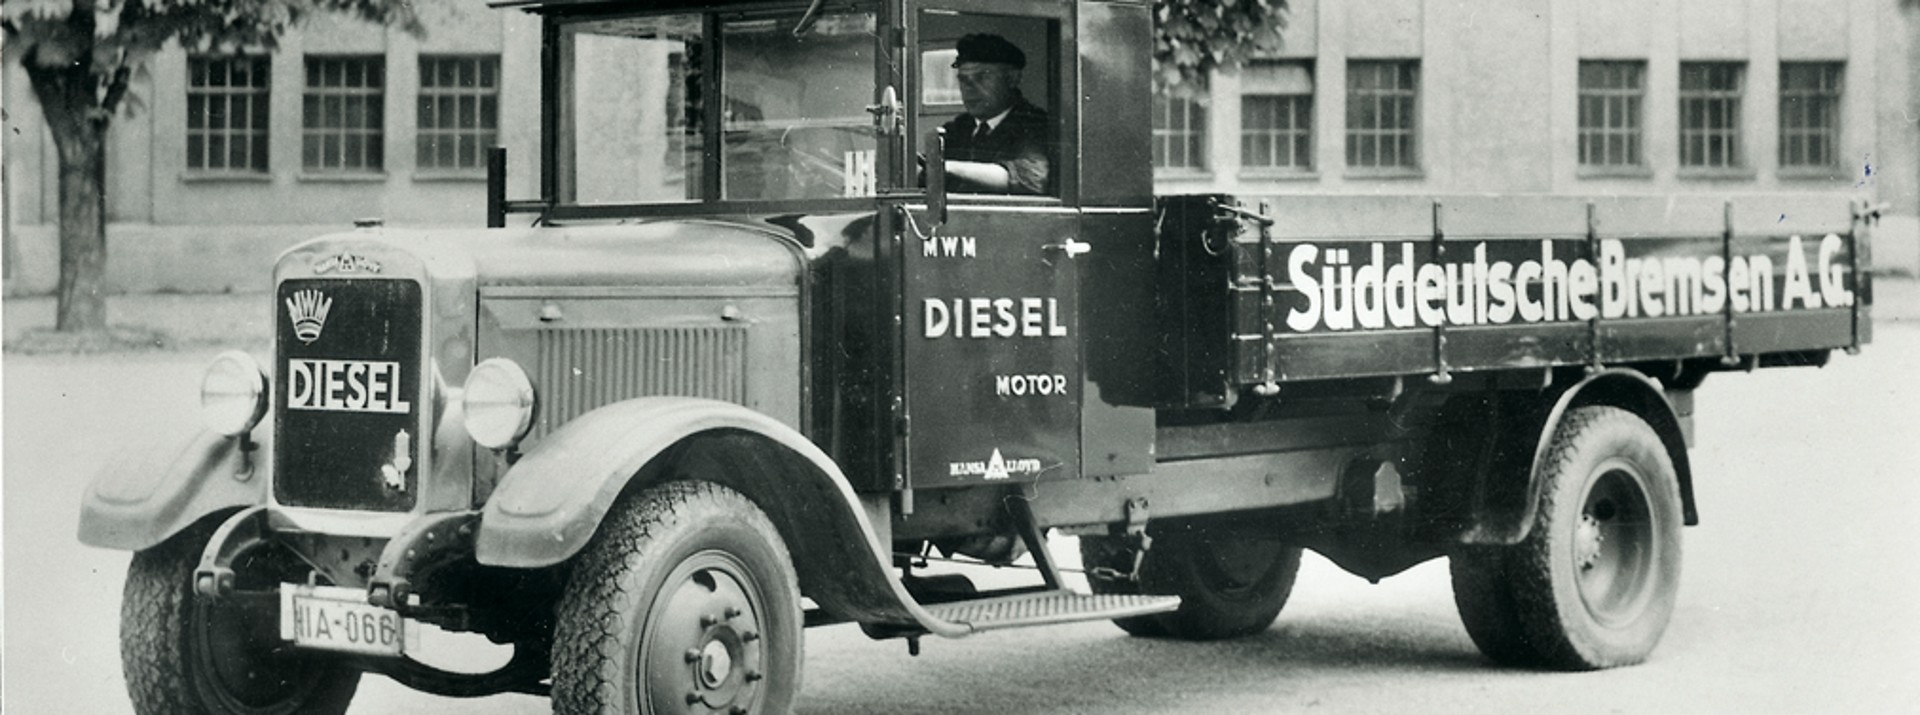 Black and white photo of a historical truck with the inscription "Süddeutsche Bremse A.G." on the loading area